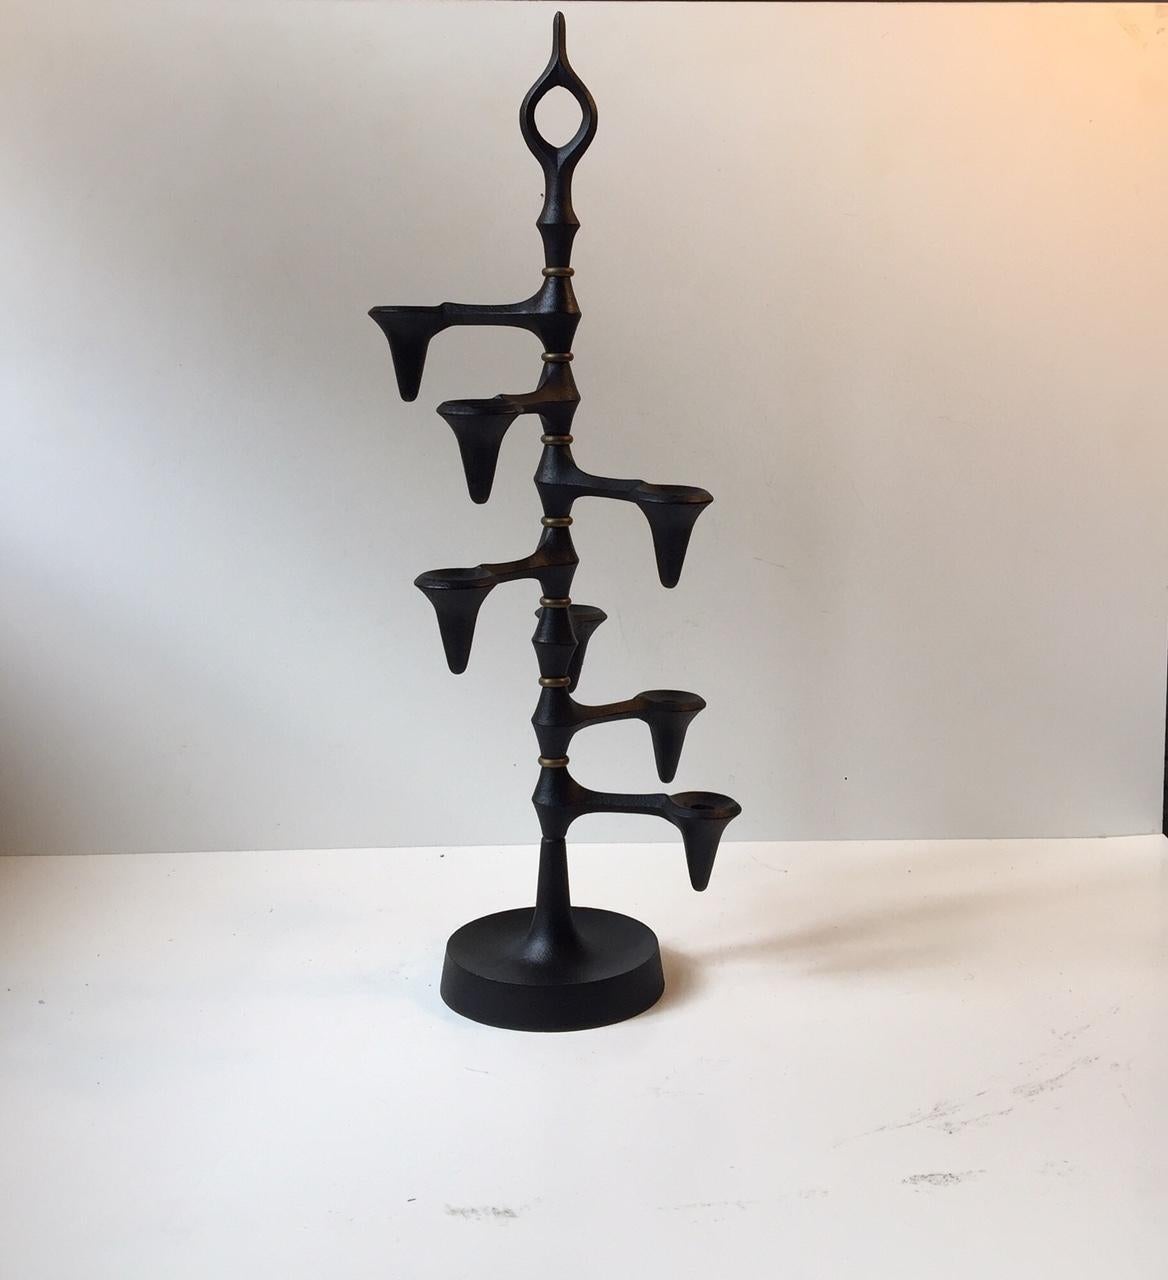 Large sculptural candleholder designed by Jens Harald Quistgaard. Manufactured by IHQ Danish Design in the 1960s in Denmark. Made of black lacquered cast iron and features seven rotating/adjustable holders for candles separated by brass rings. The